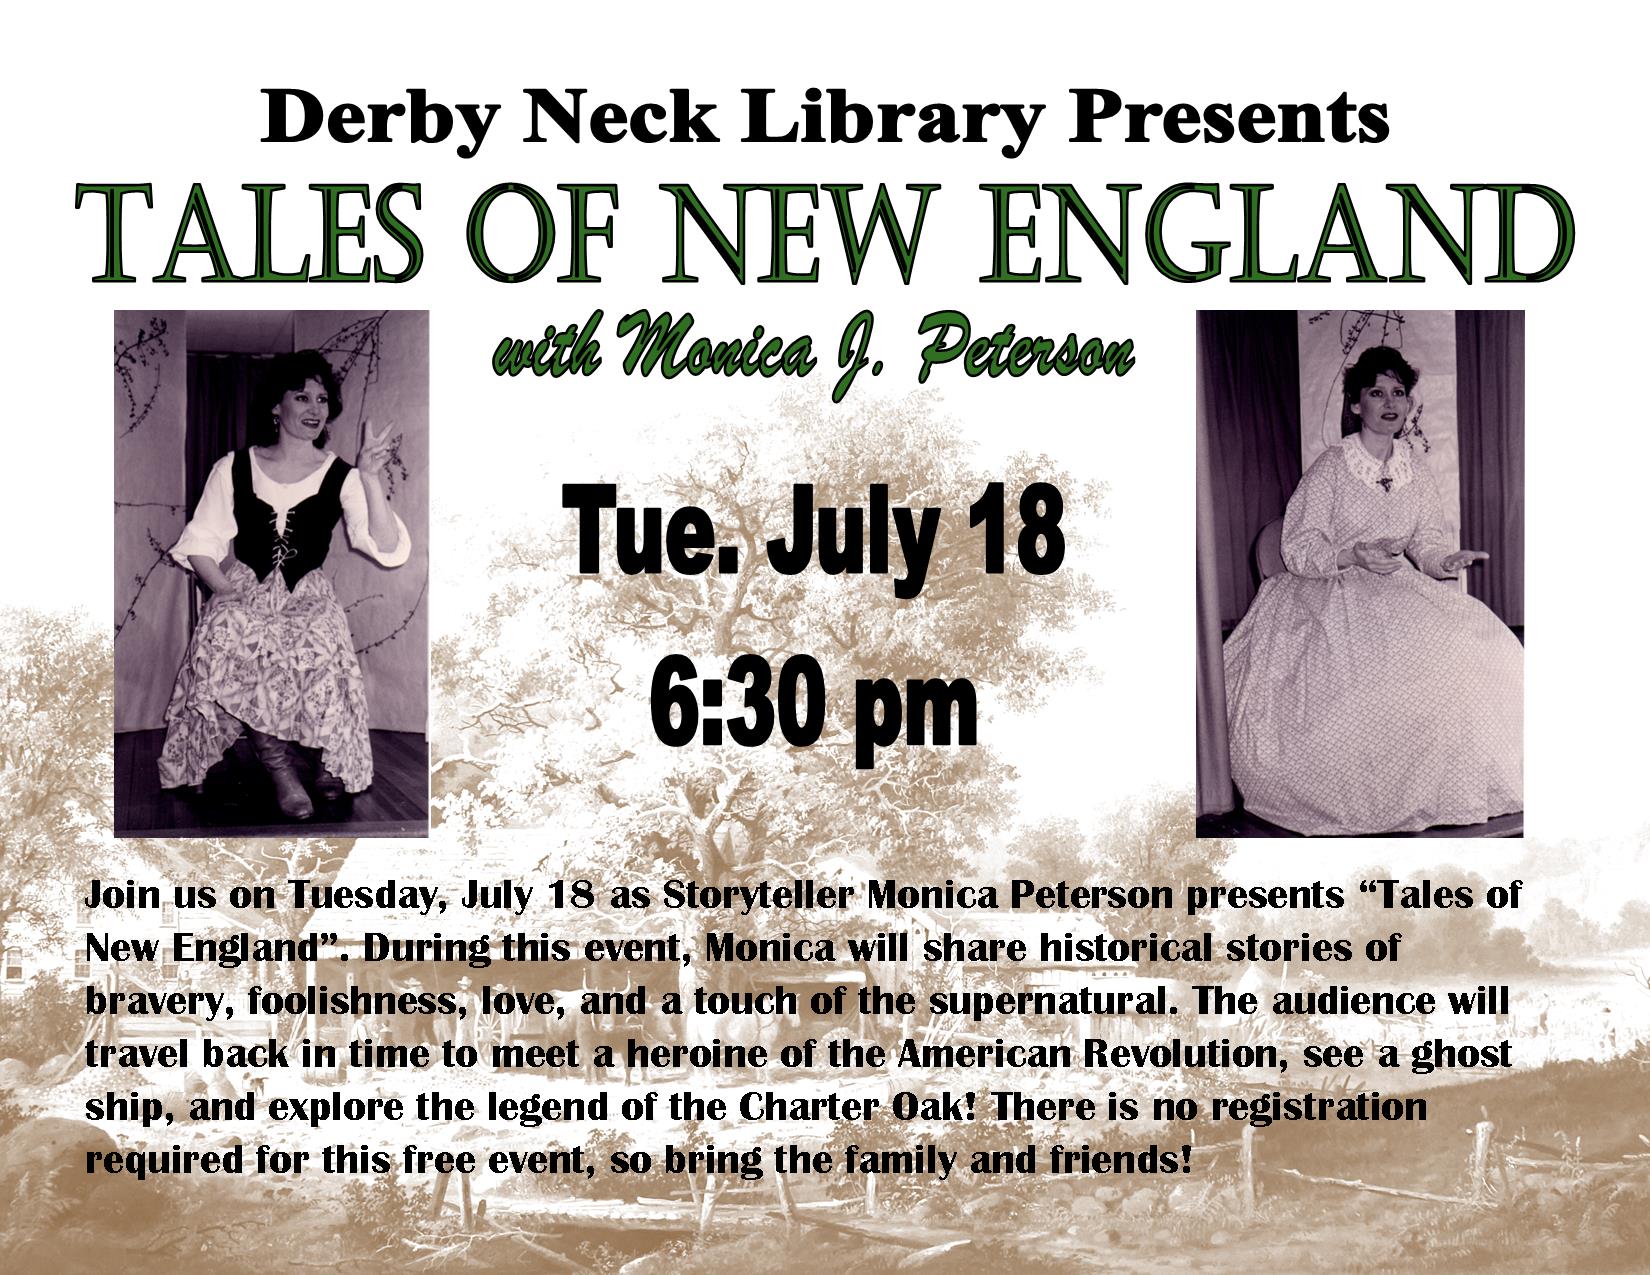 Tales of New England with Monica Peterson